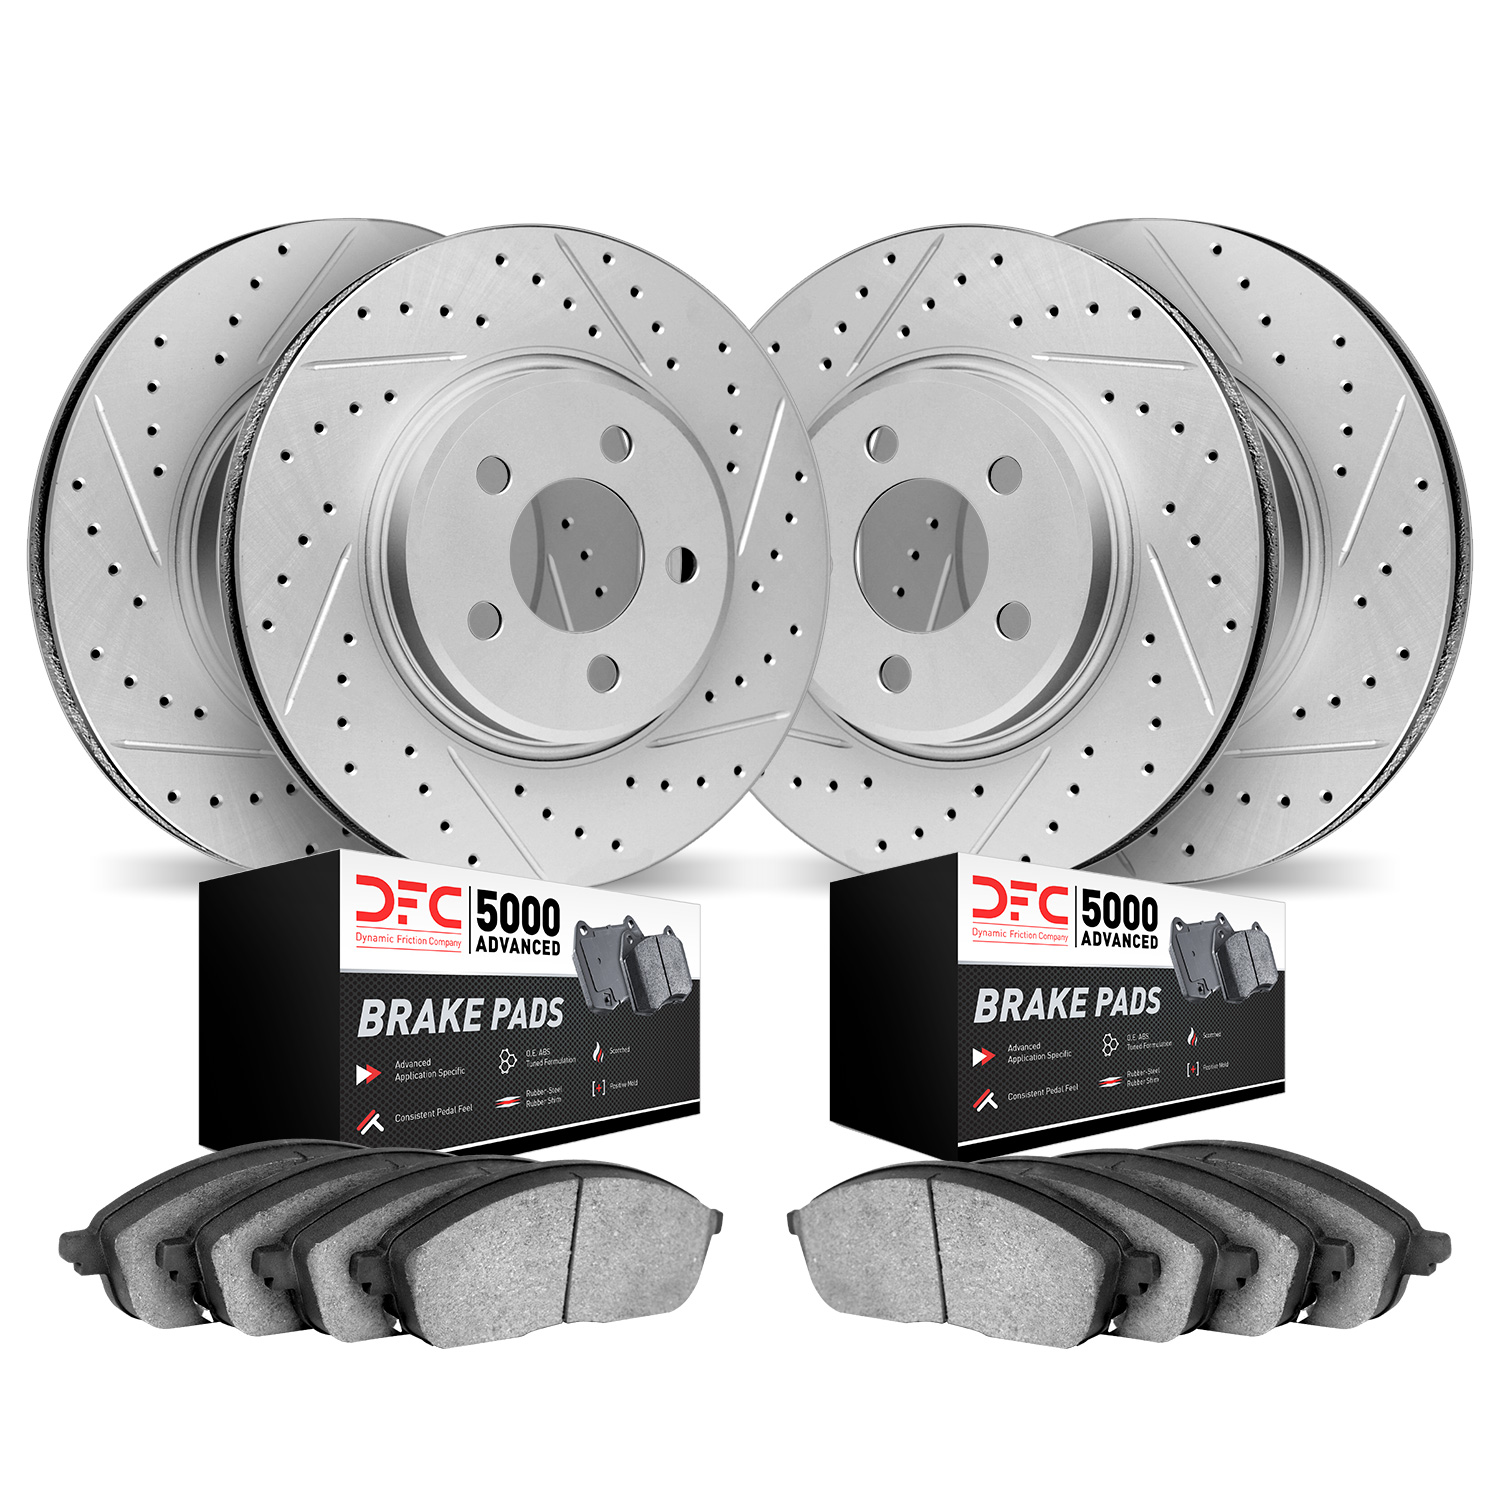 2504-31044 Geoperformance Drilled/Slotted Rotors w/5000 Advanced Brake Pads Kit, Fits Select BMW, Position: Front and Rear